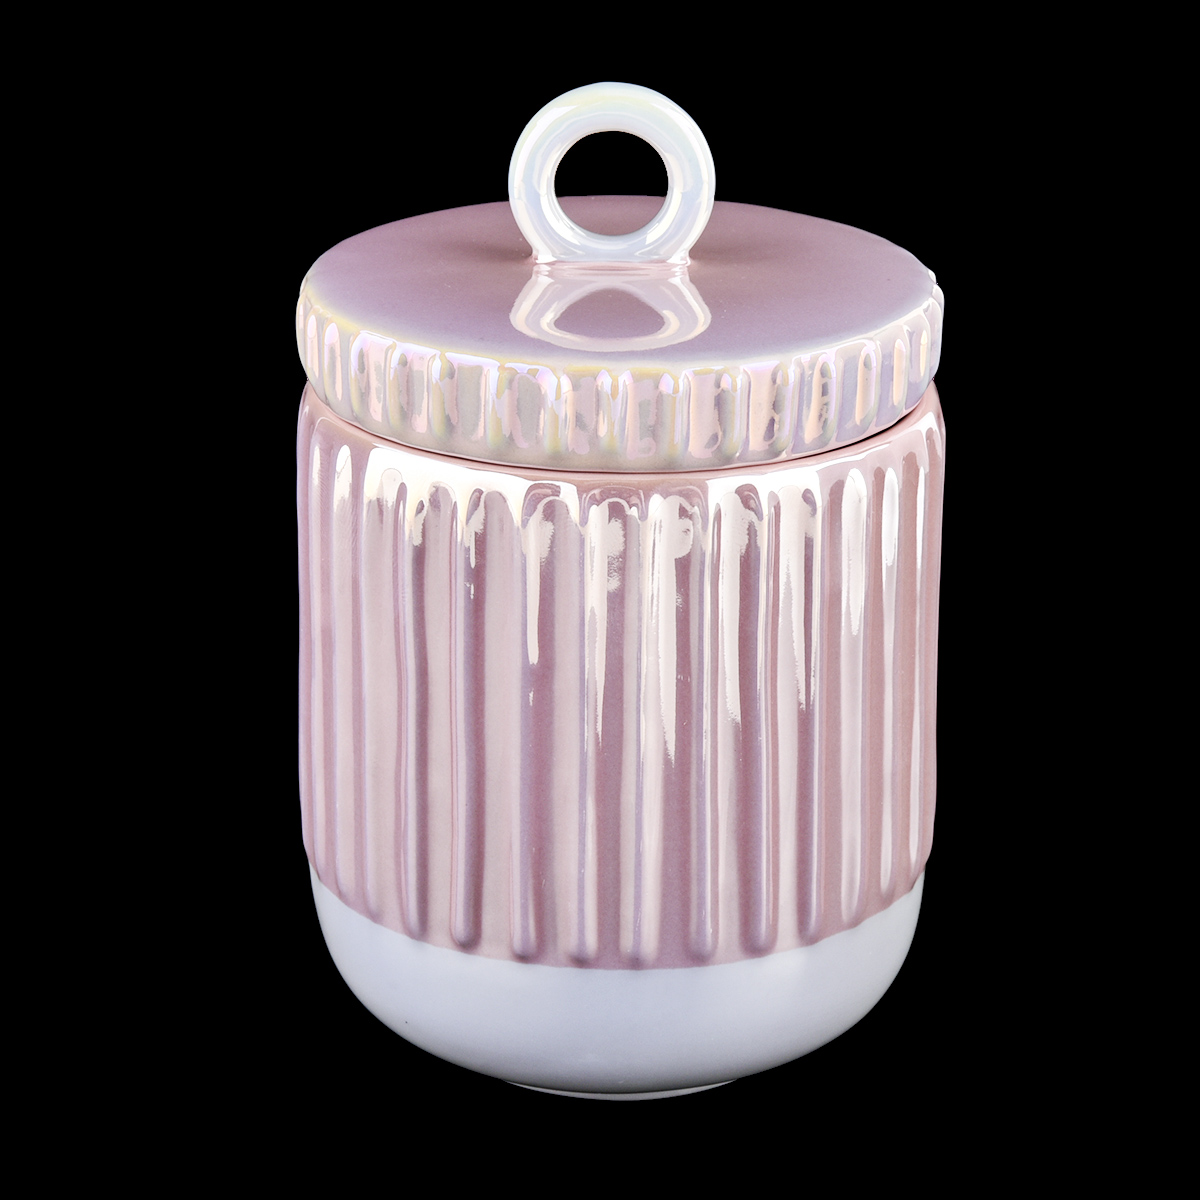 Wholesale luxury ceramic candle vessel with lid for candle making